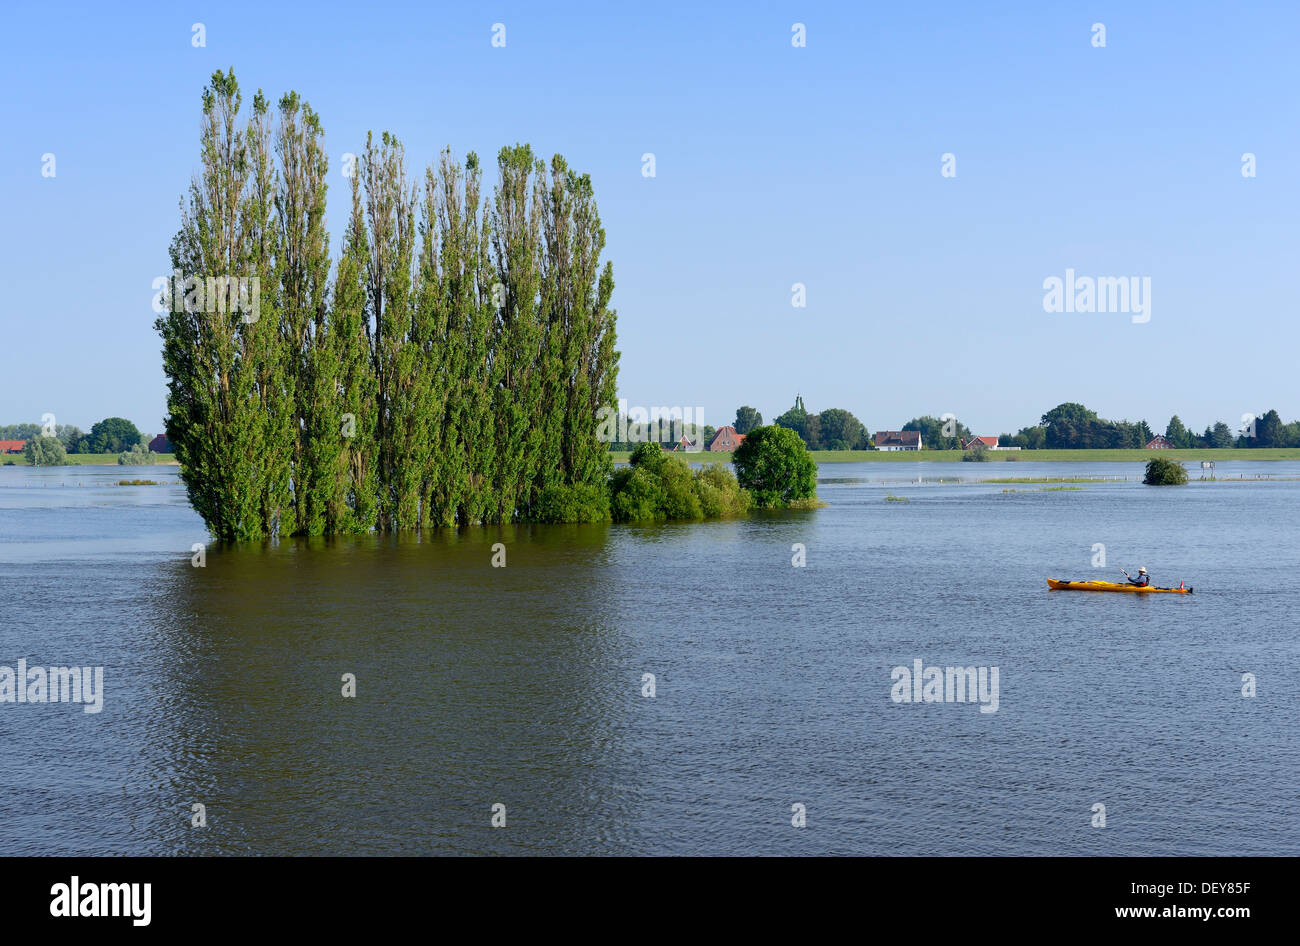 Elbe flood in 2013 in old narrow nurse, 4 and marshy land, Hamburg, Germany, Europe, Elbe-Flut 2013 in Altengamme, Vier- und Mar Stock Photo